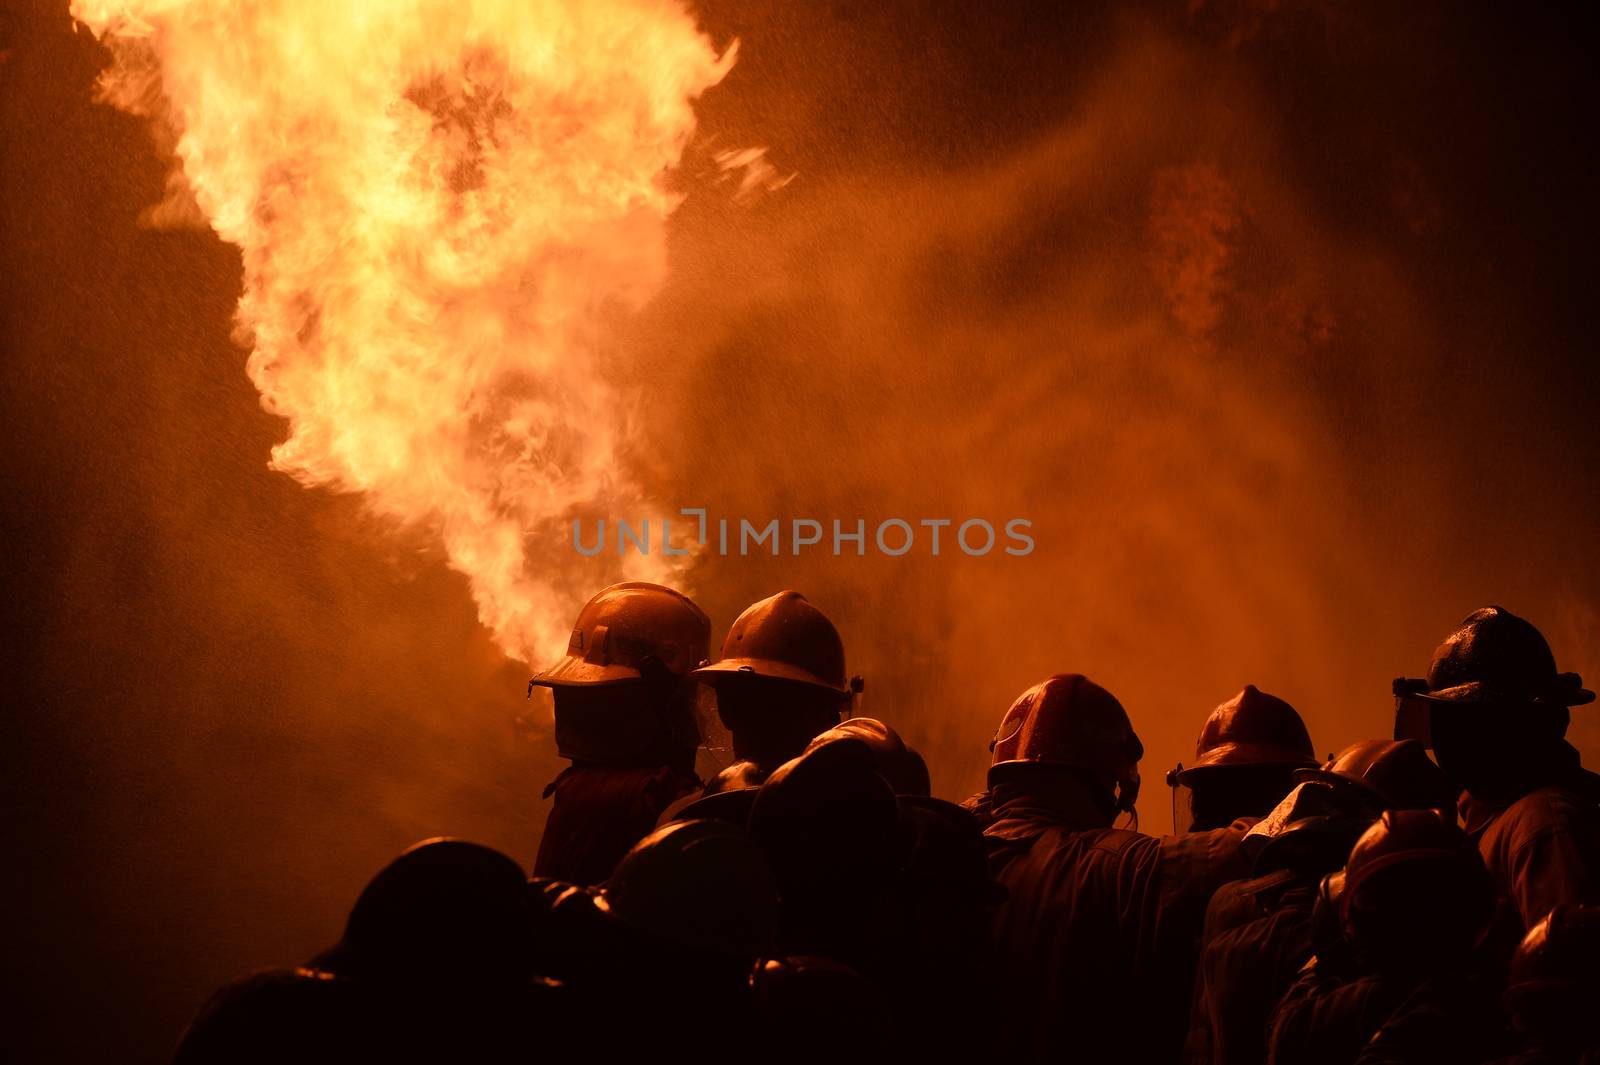 firefighters with fire hose fight with fire at night